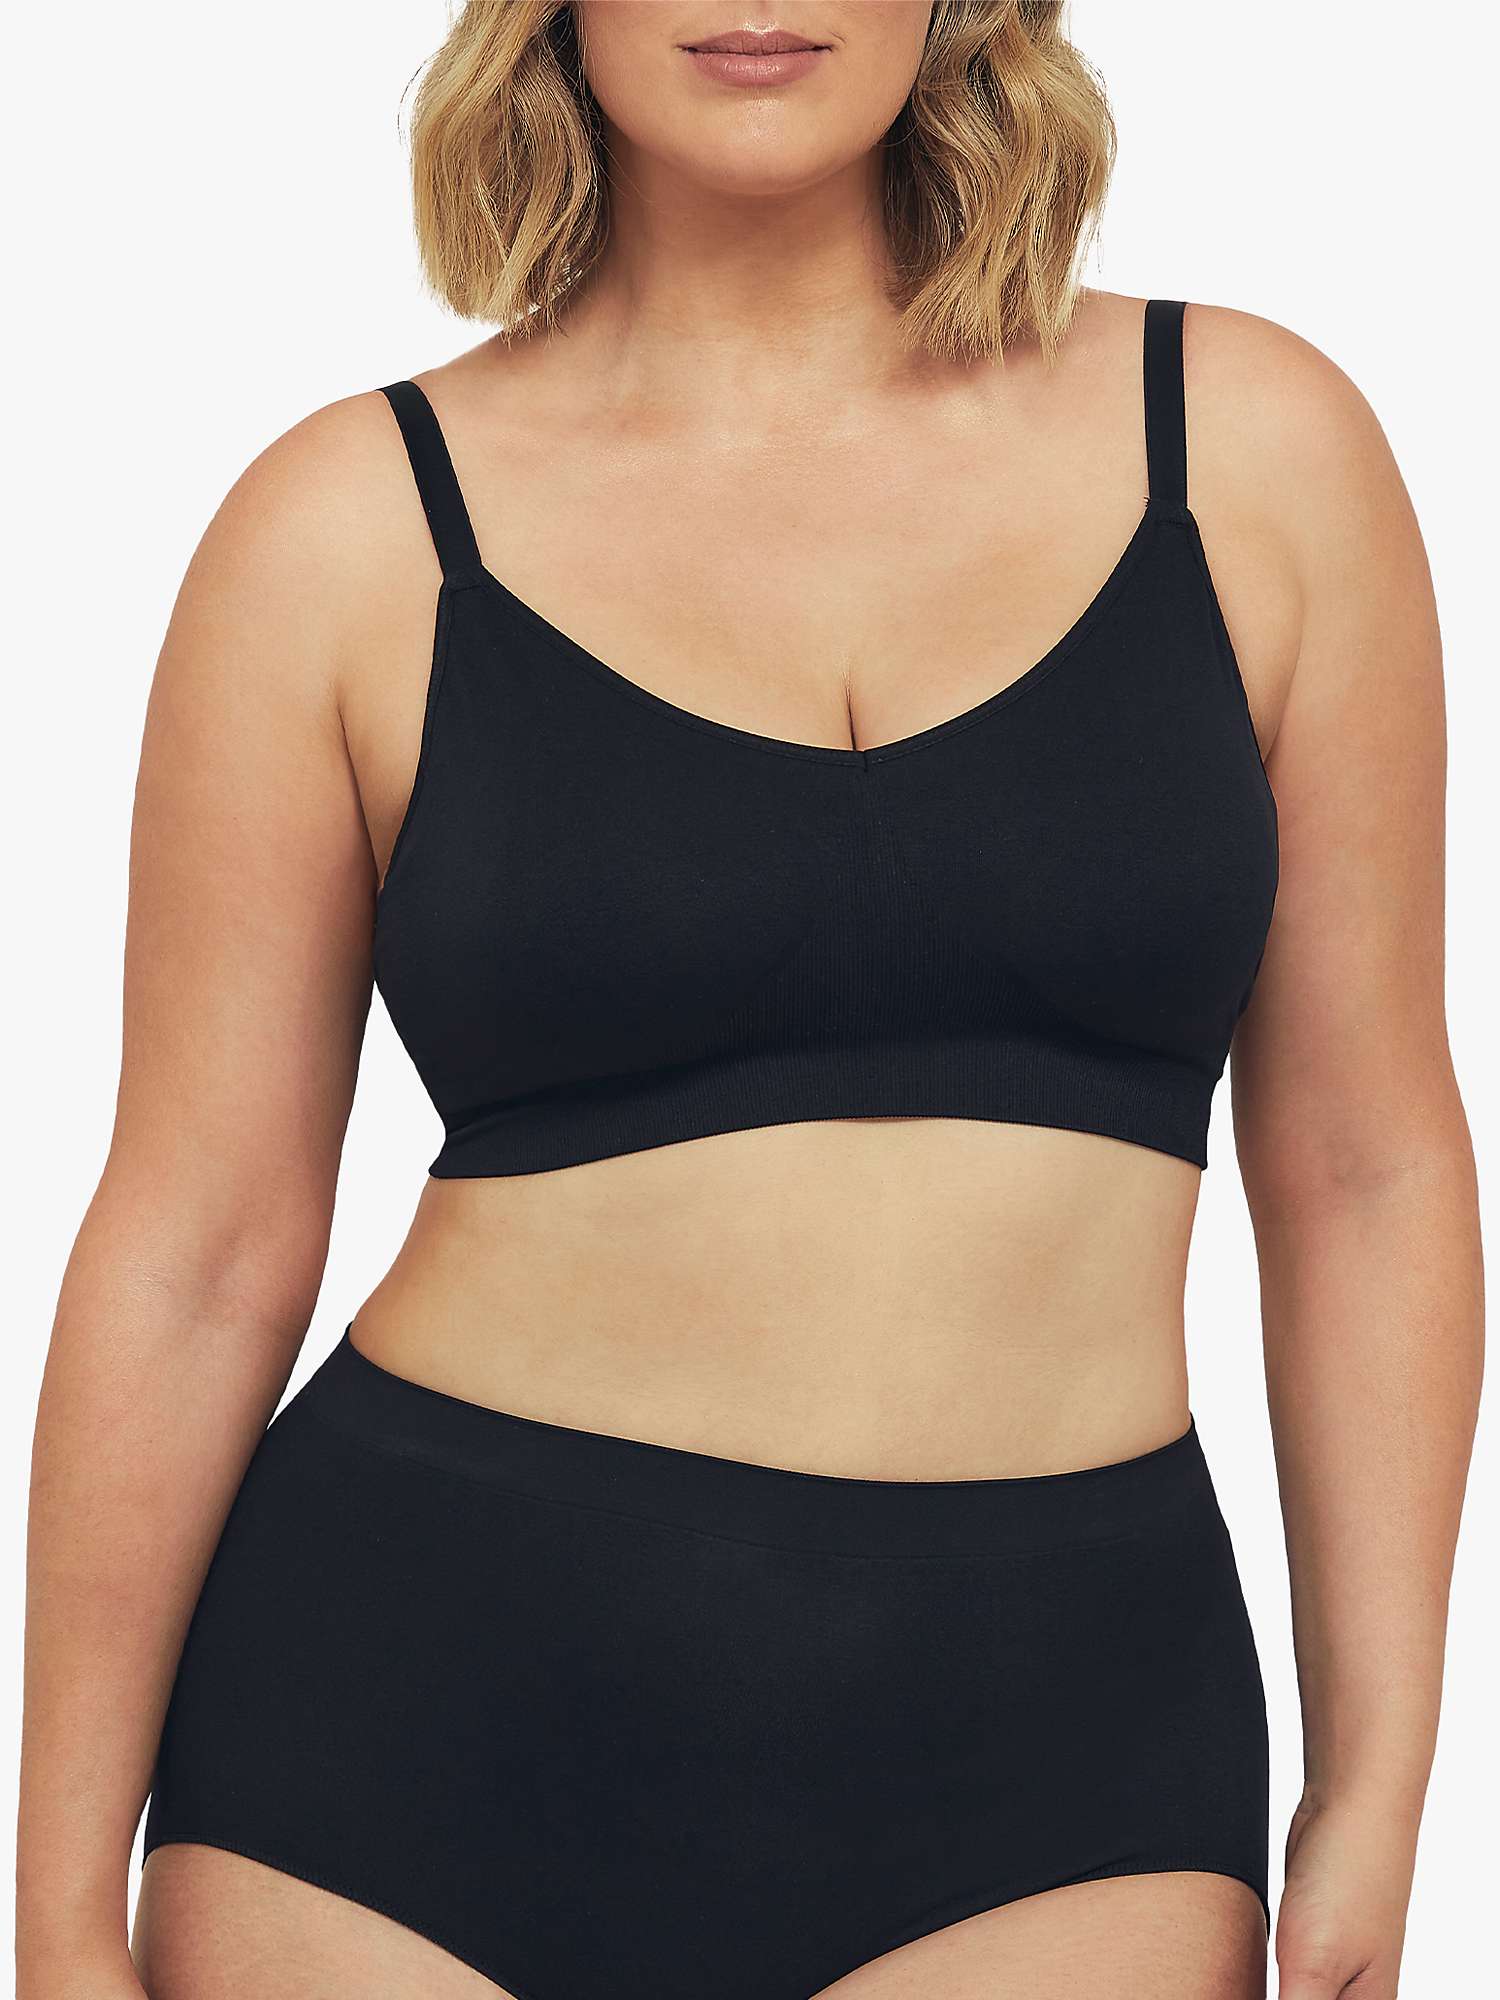 Buy Ambra Curvesque Non Wired Support Bra Online at johnlewis.com